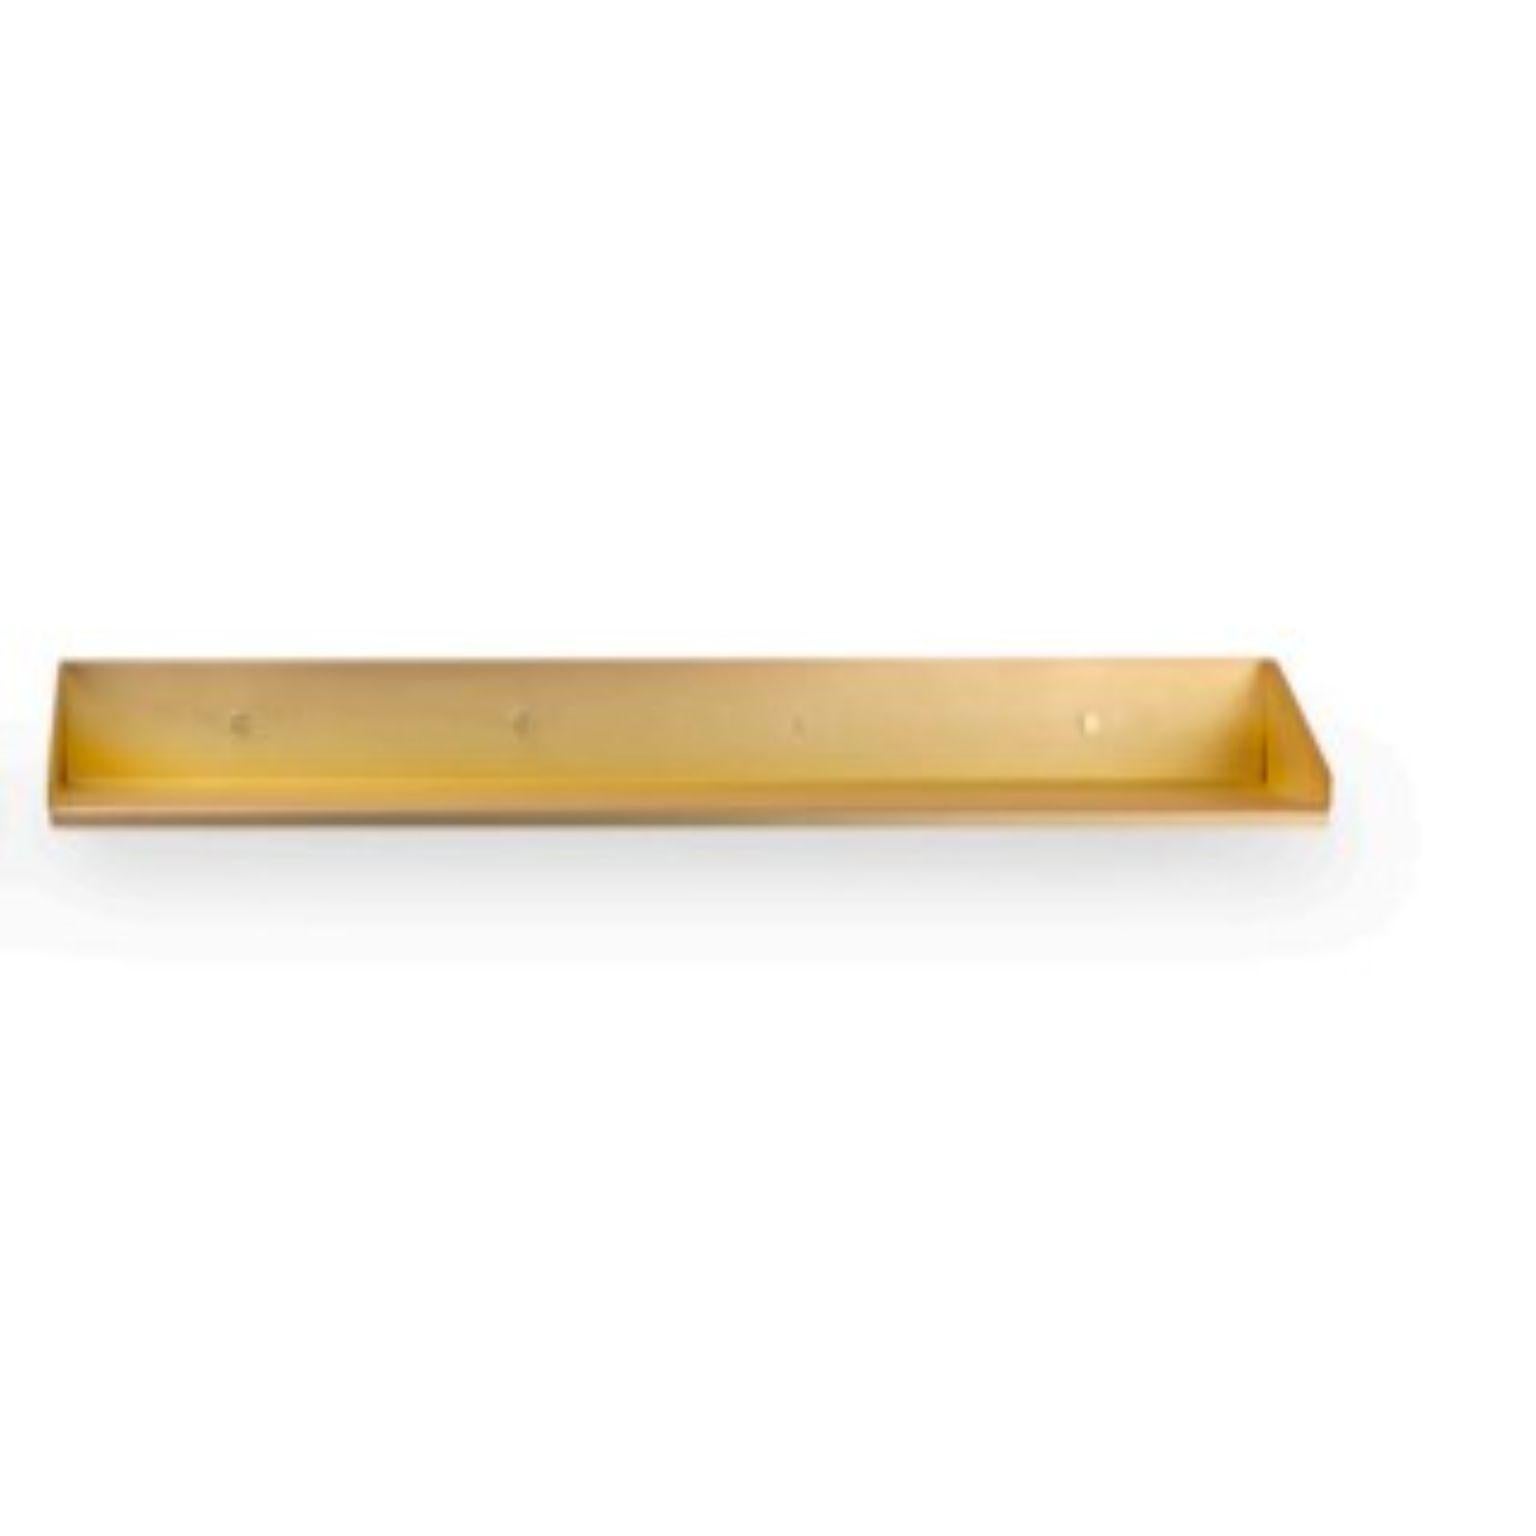 Bendy large shelf by Mingardo
Dimensions: D95 x W25 x H10 cm 
Materials: matt brass plated stainless steel
Weight: 8 kg

Also available in different finishes and dimensions.

Bendy is a shelf made of a single stainless steel foil, folded and